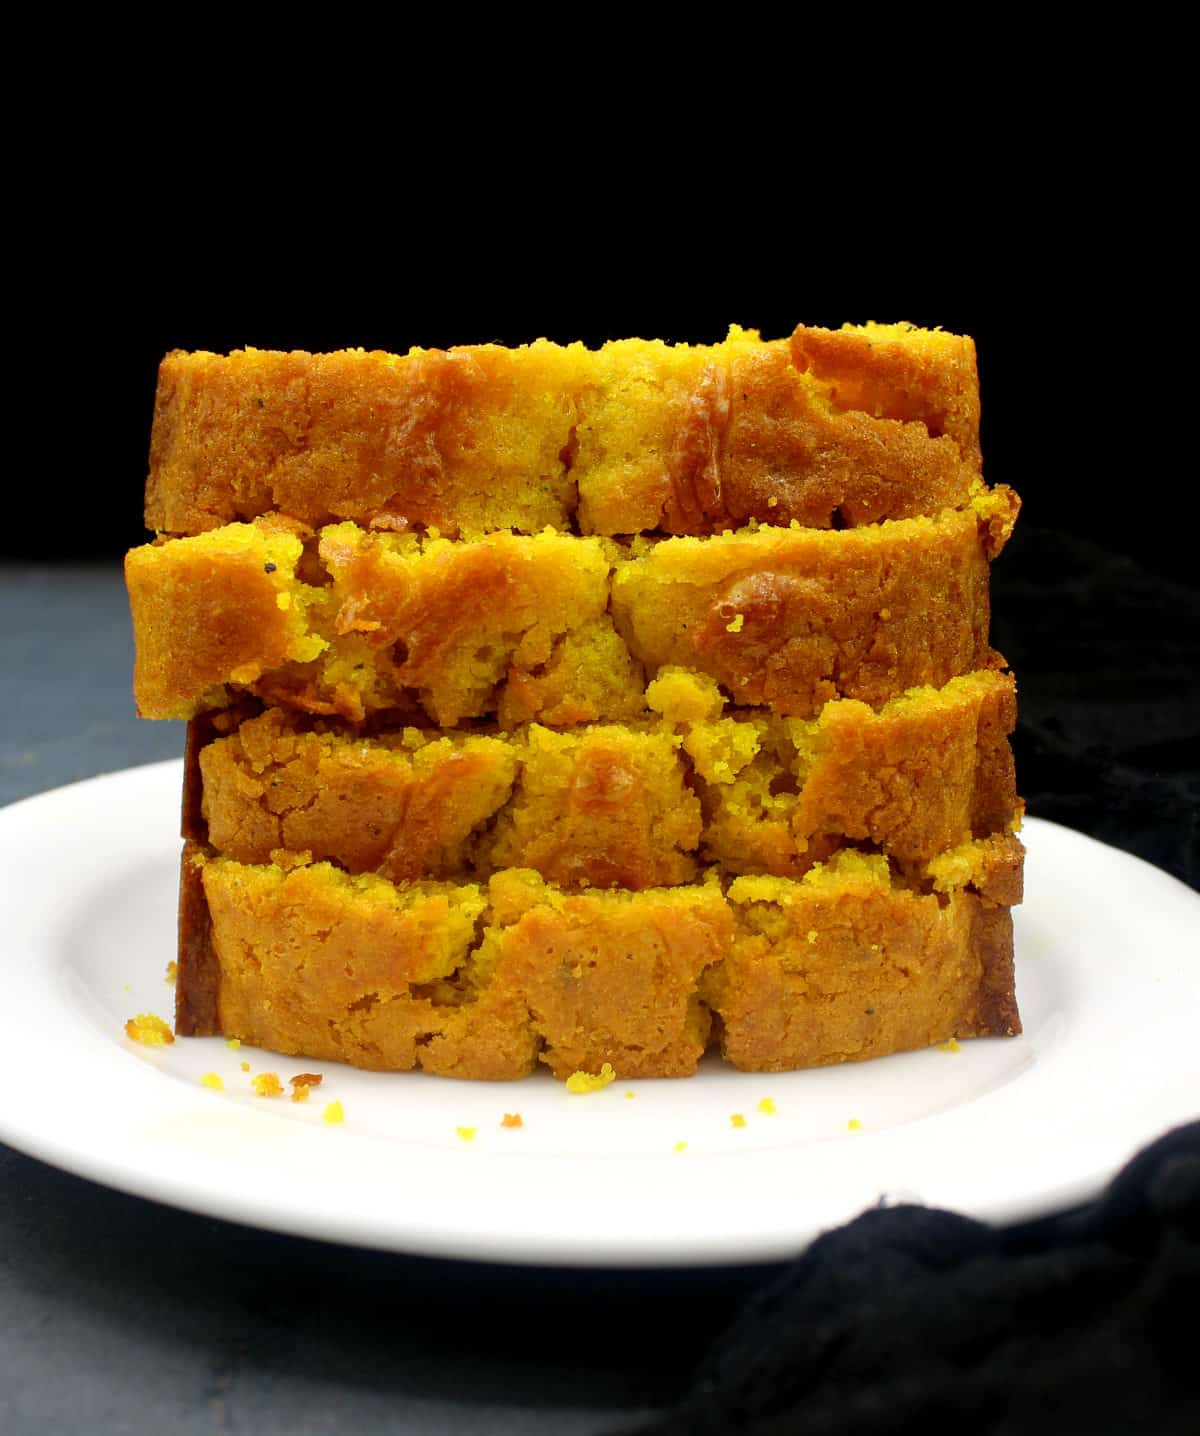 Four slices of vegan turmeric cake stacked on top of one another in a white dish.